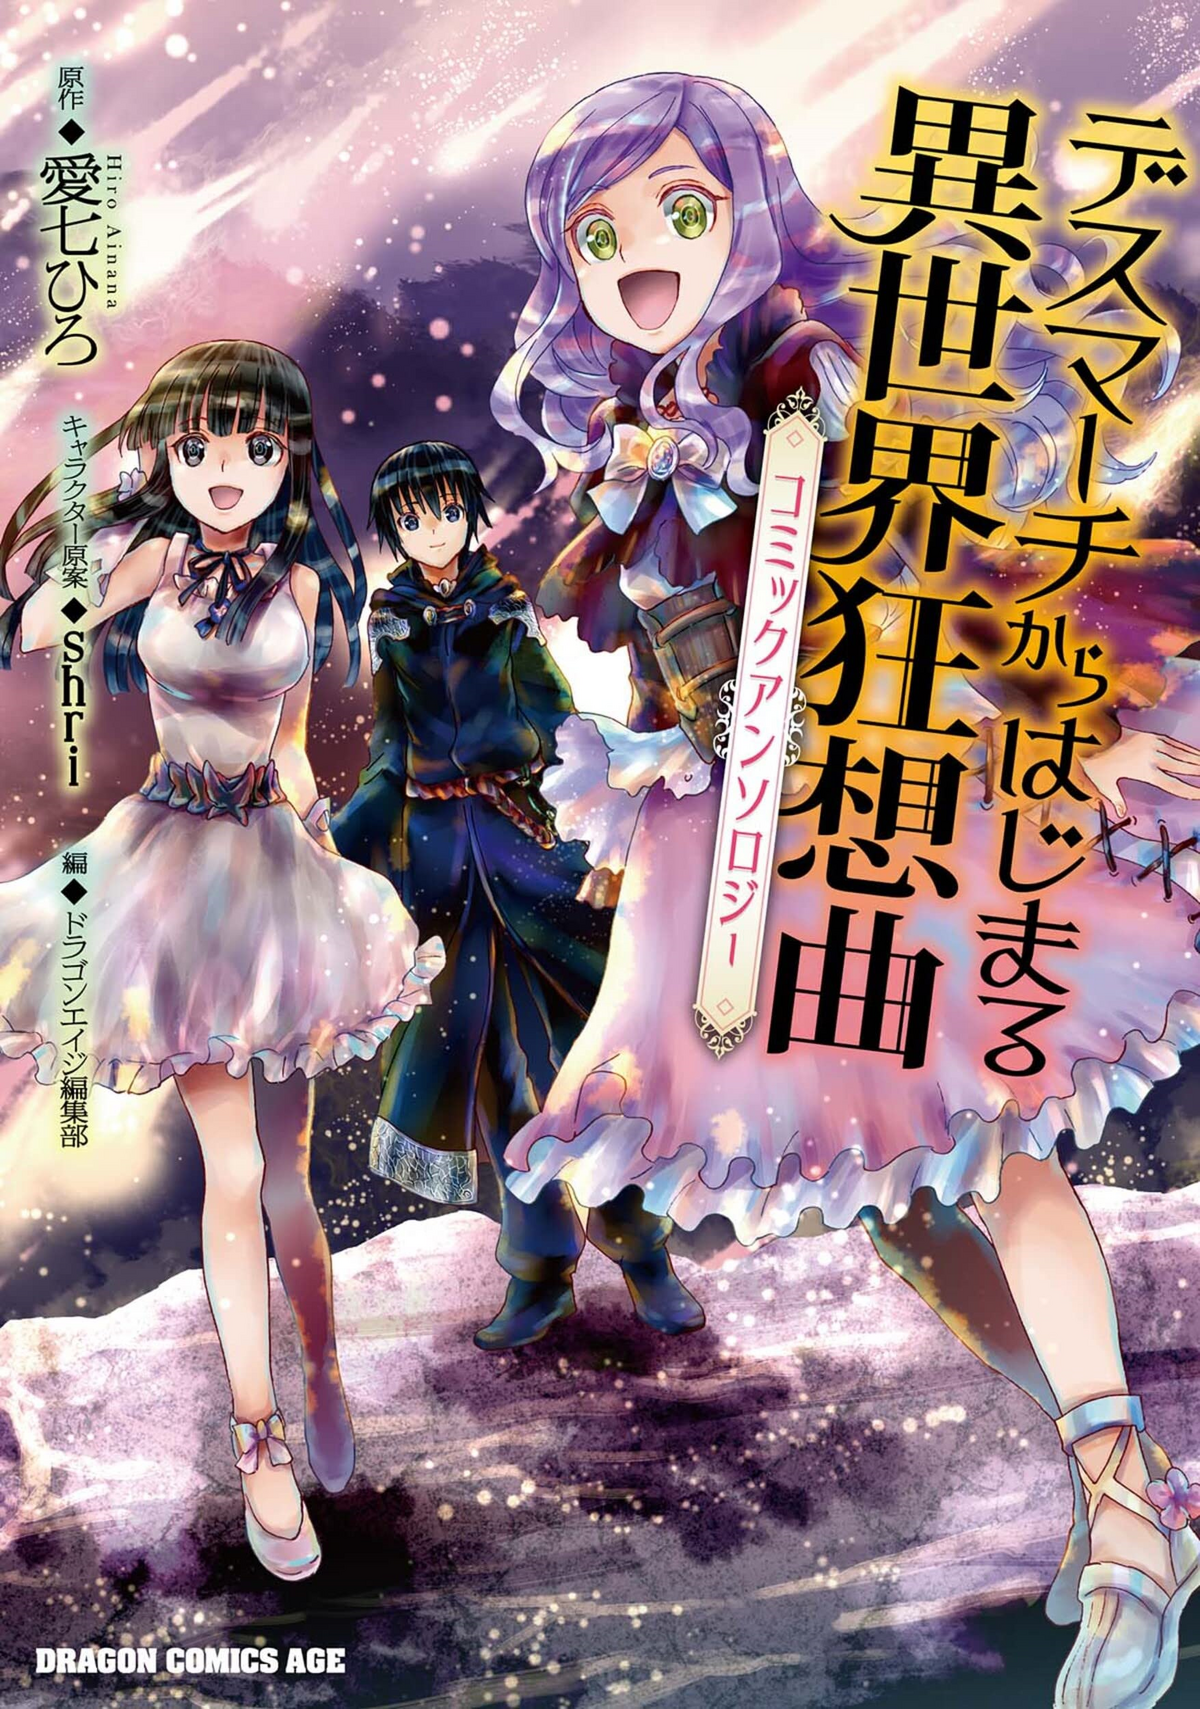 Death March to the Parallel World Rhapsody Comic Anthology Manga